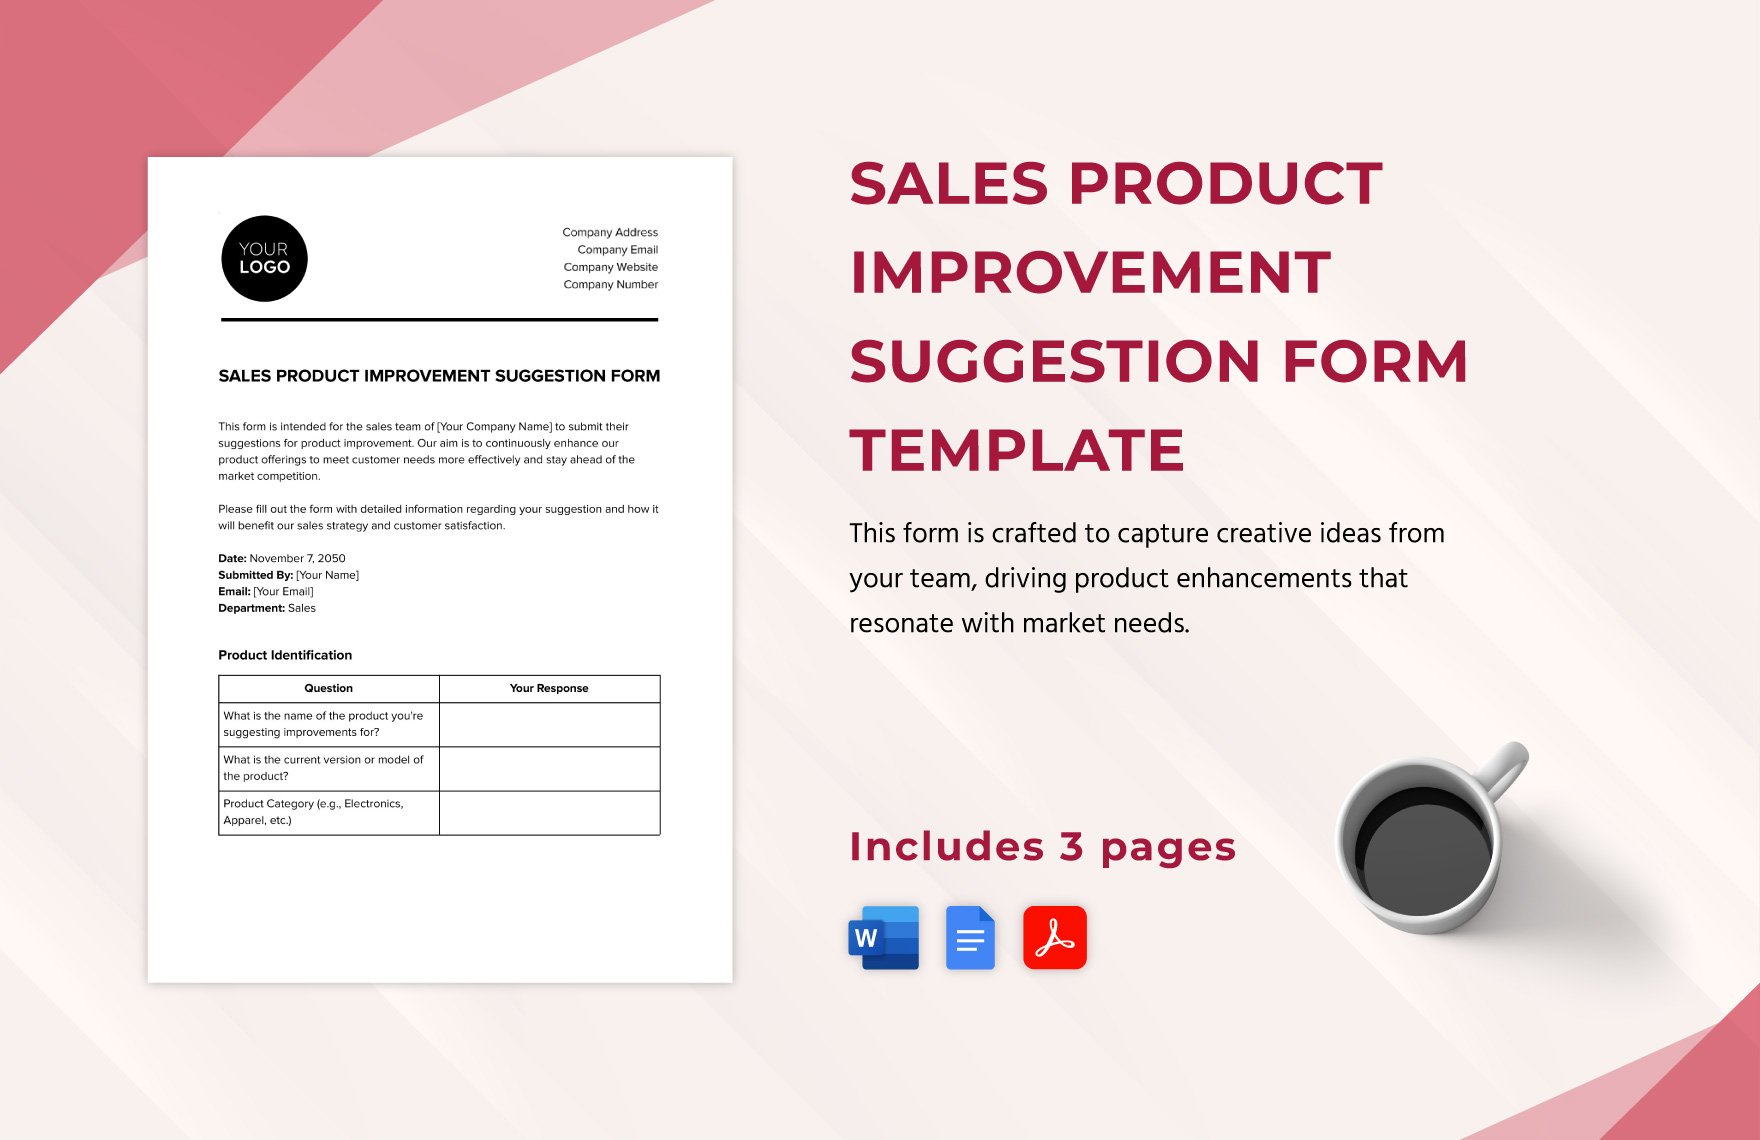 Sales Product Improvement Suggestion Form Template in Word, Google Docs, PDF